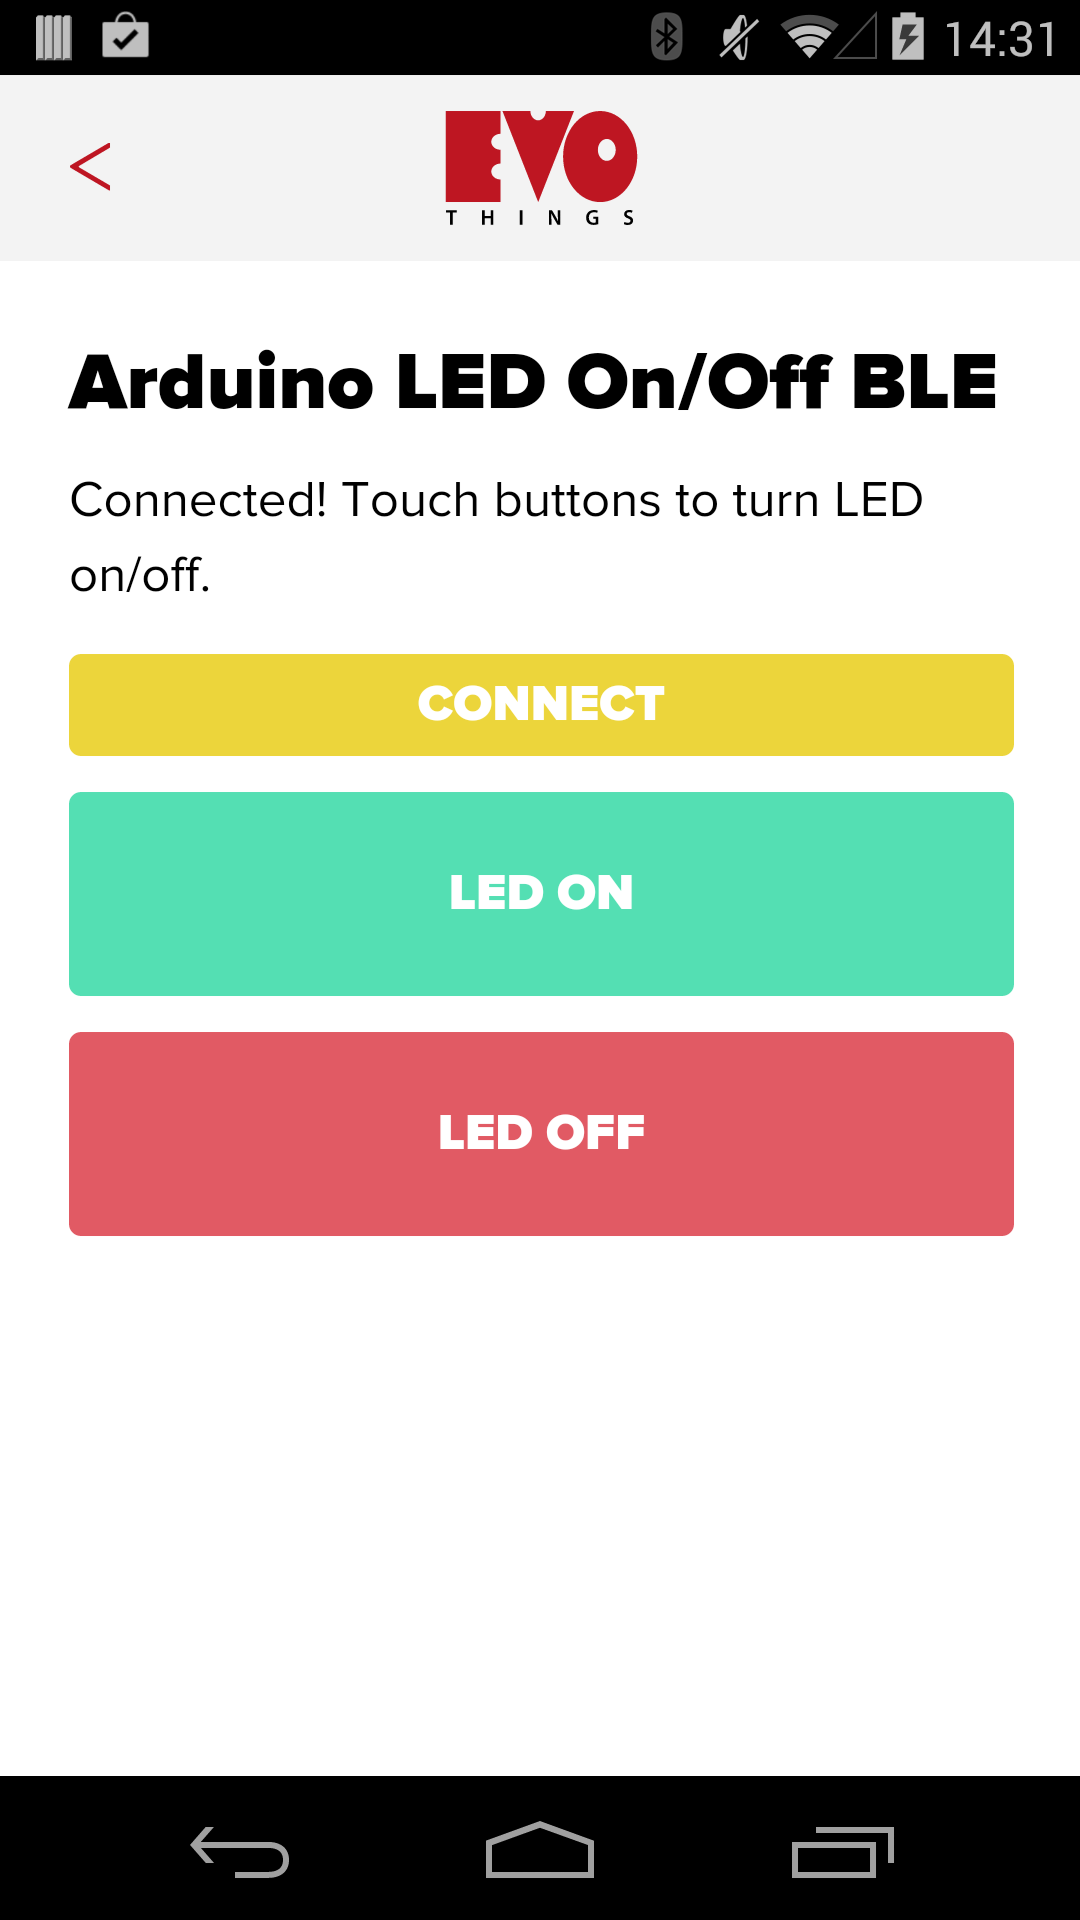 Arduino LED On/Off BLE